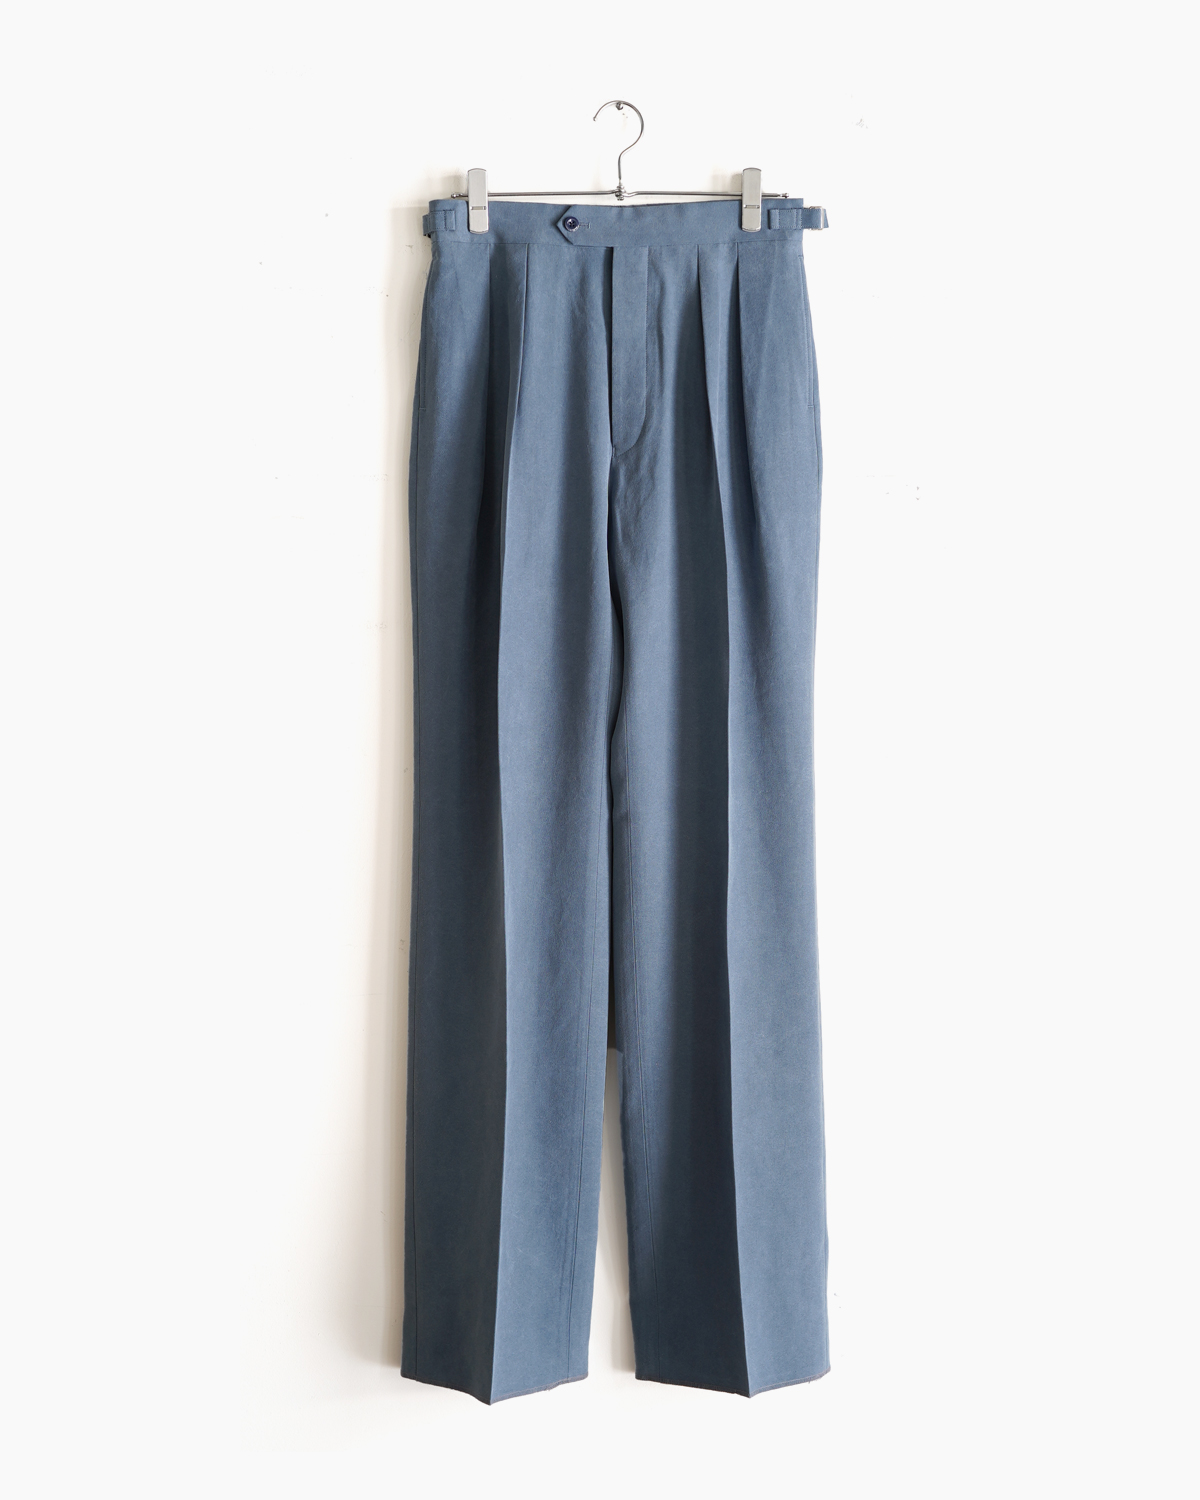 CELLULOSE NIDOM｜WIDE TYPE Ⅱ  - Blue Gray｜NEAT